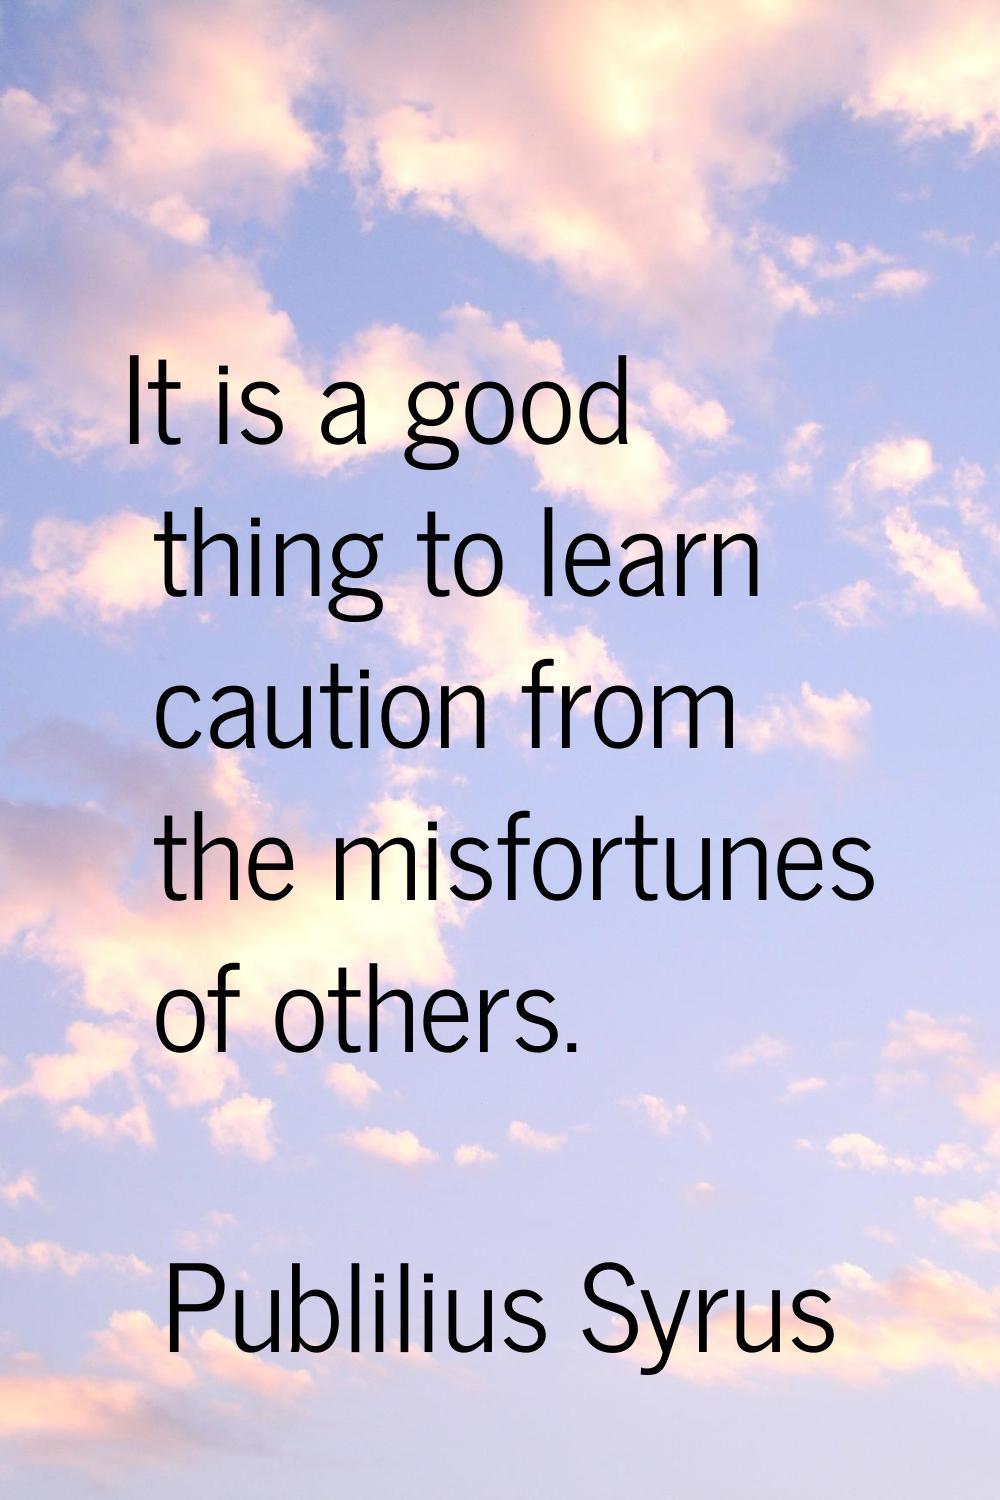 It is a good thing to learn caution from the misfortunes of others.